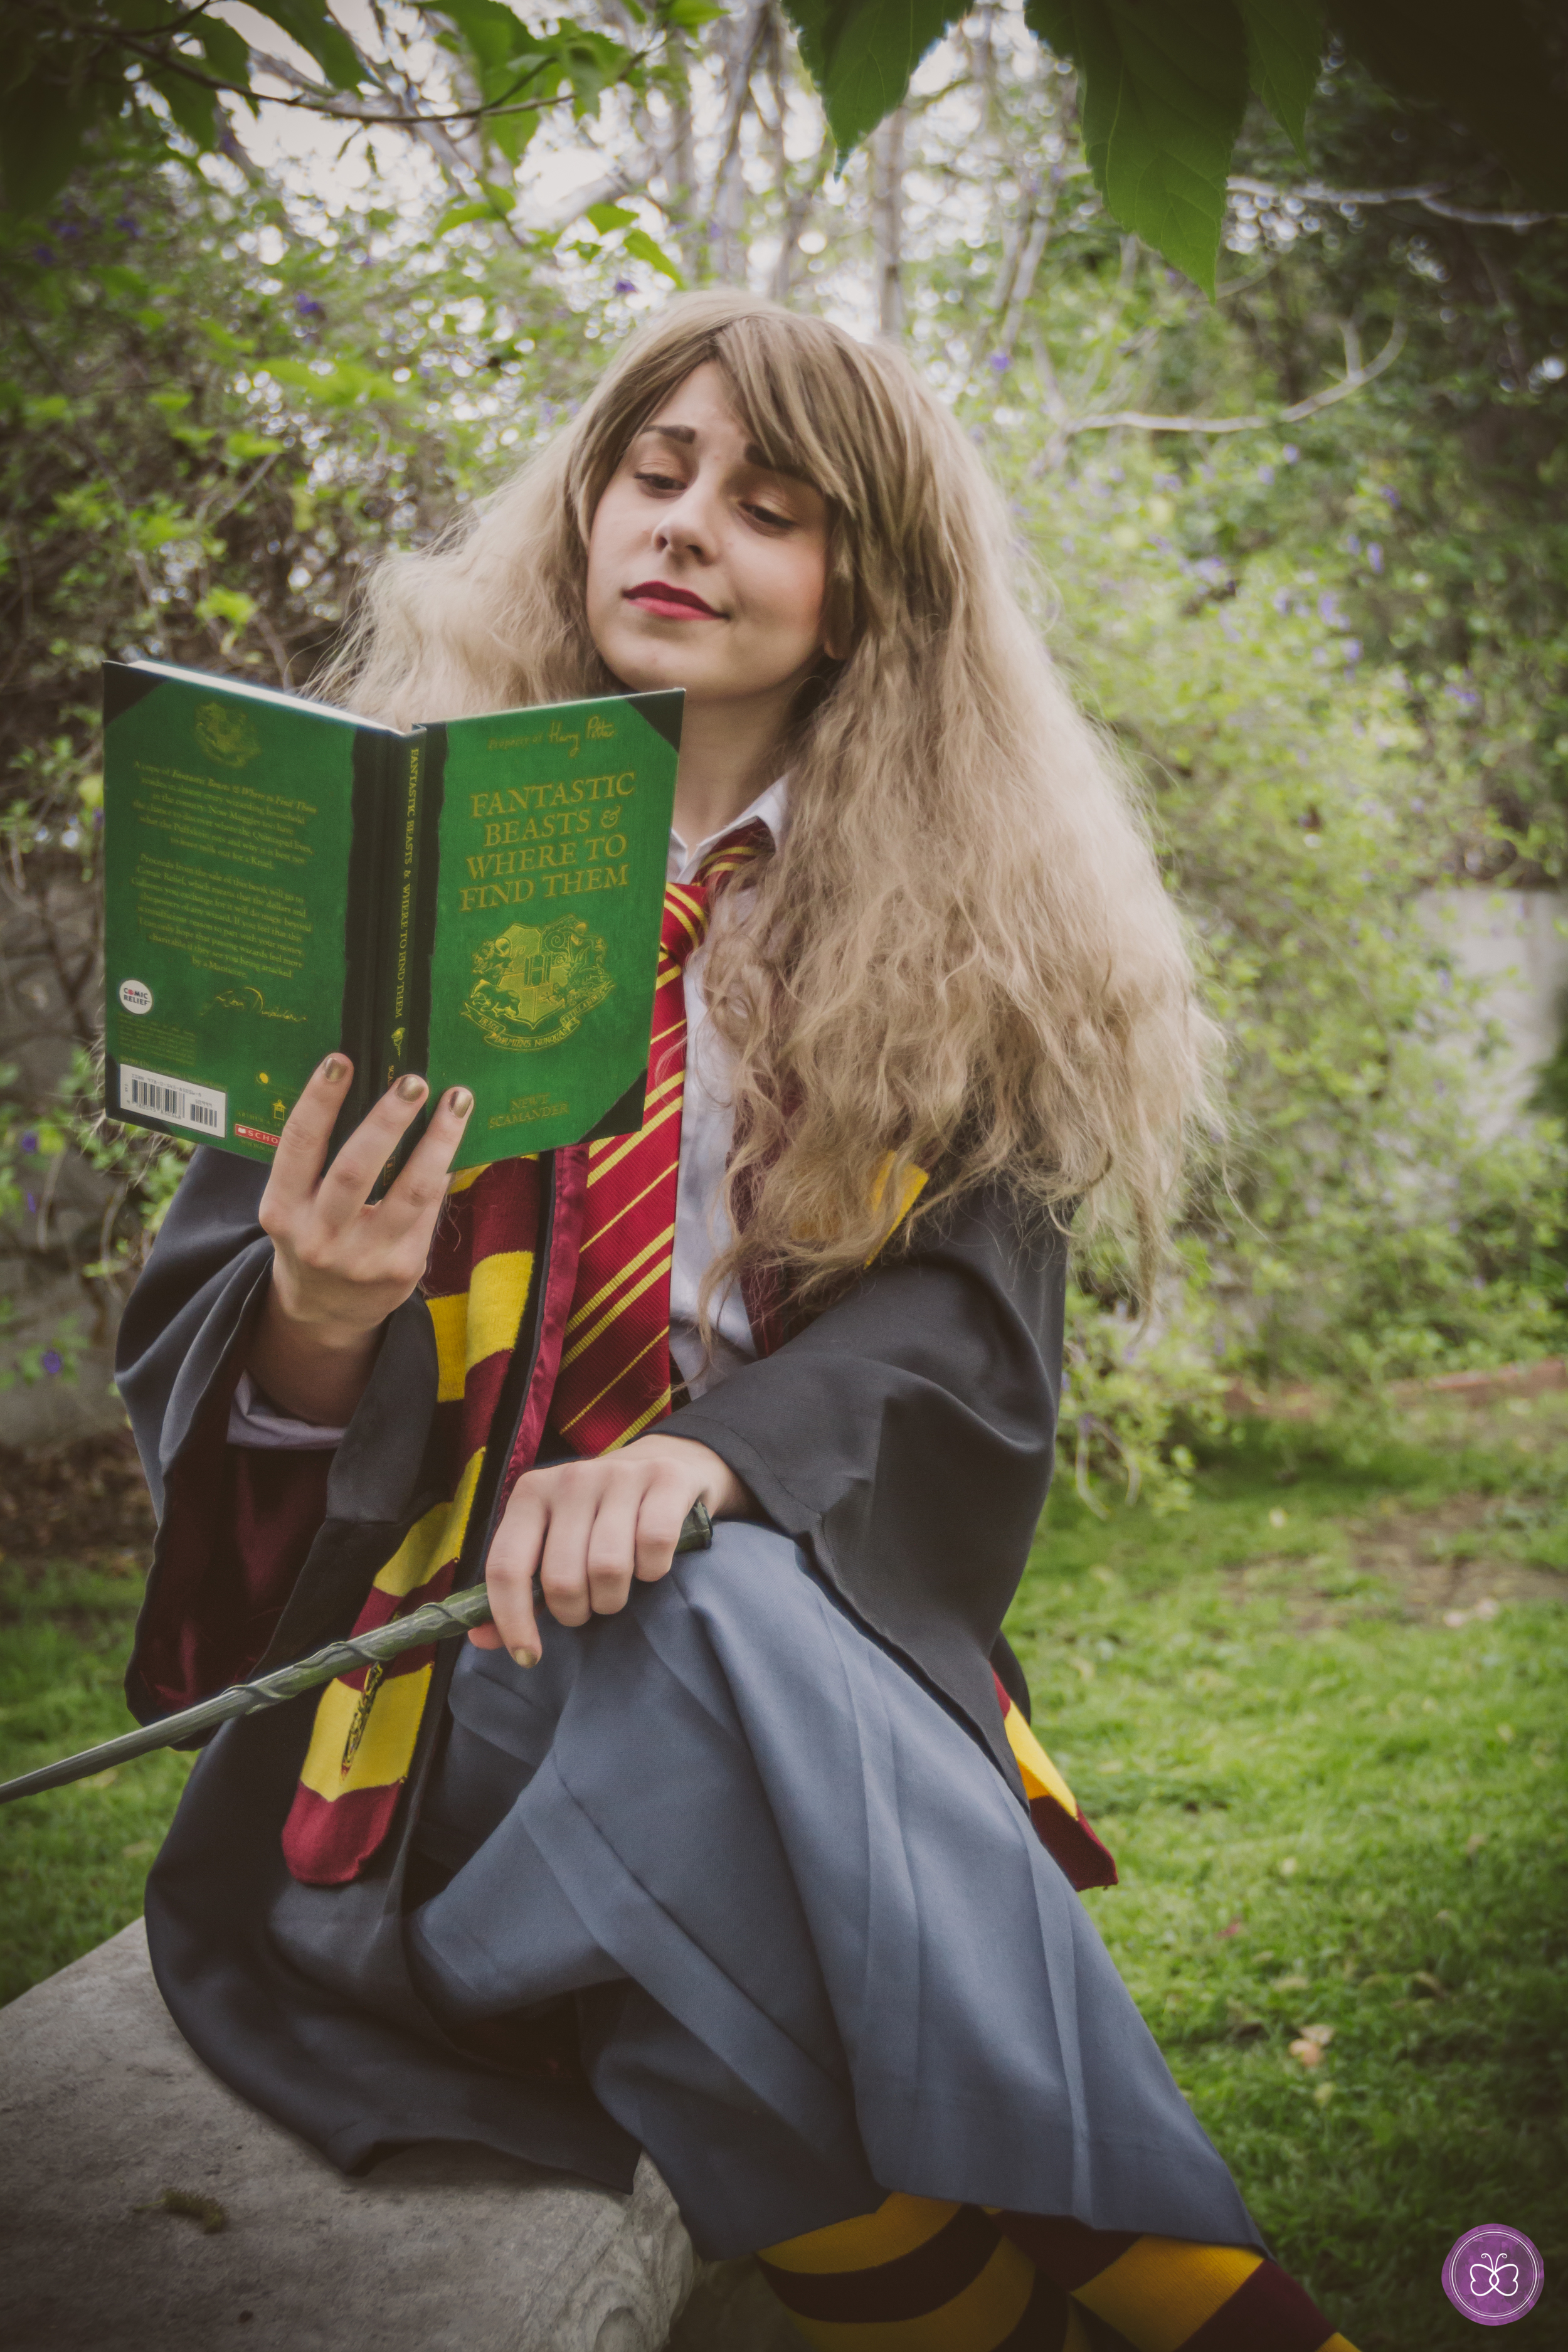 hermione harry potter hogwarts party wizard character los angeles (1 of 3).jpg